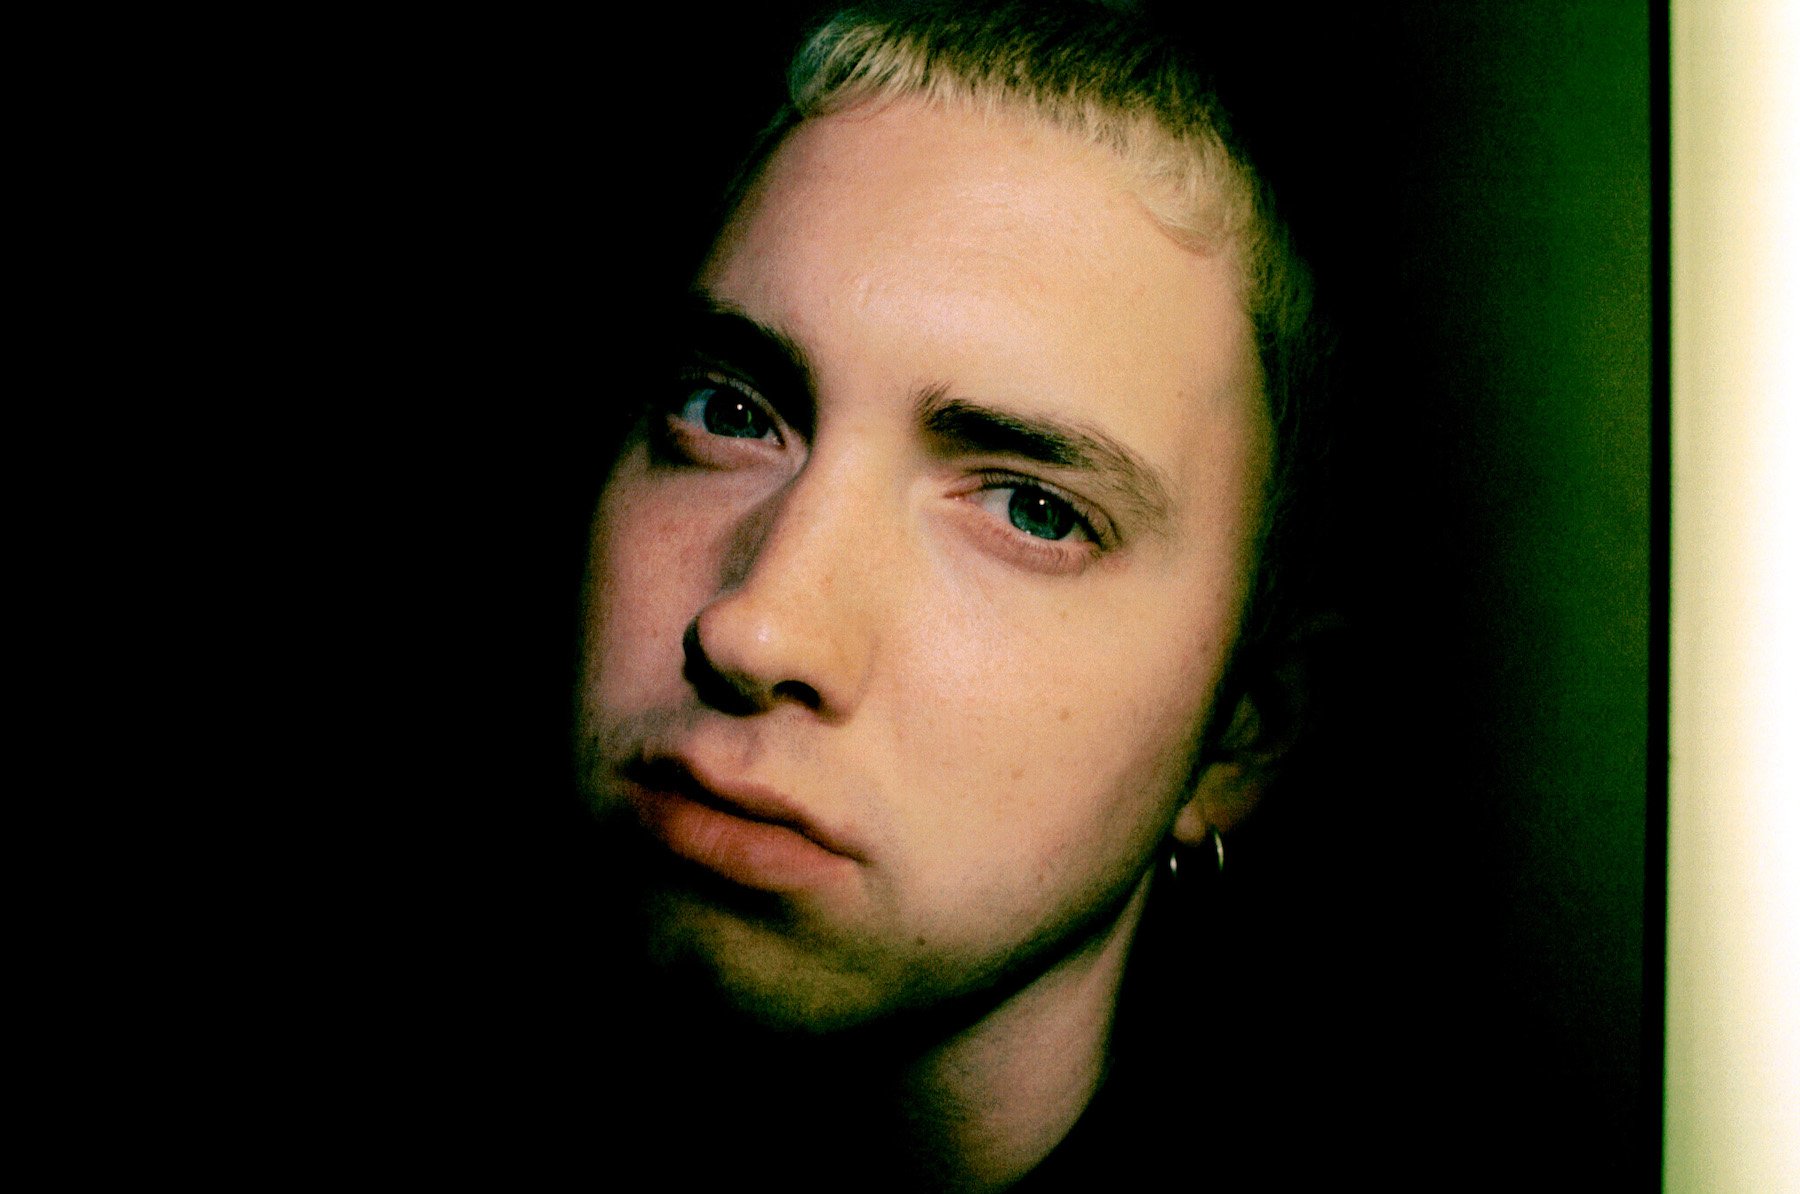 Eminem, who was sued by his mother for $10M, posing for a close-up photo